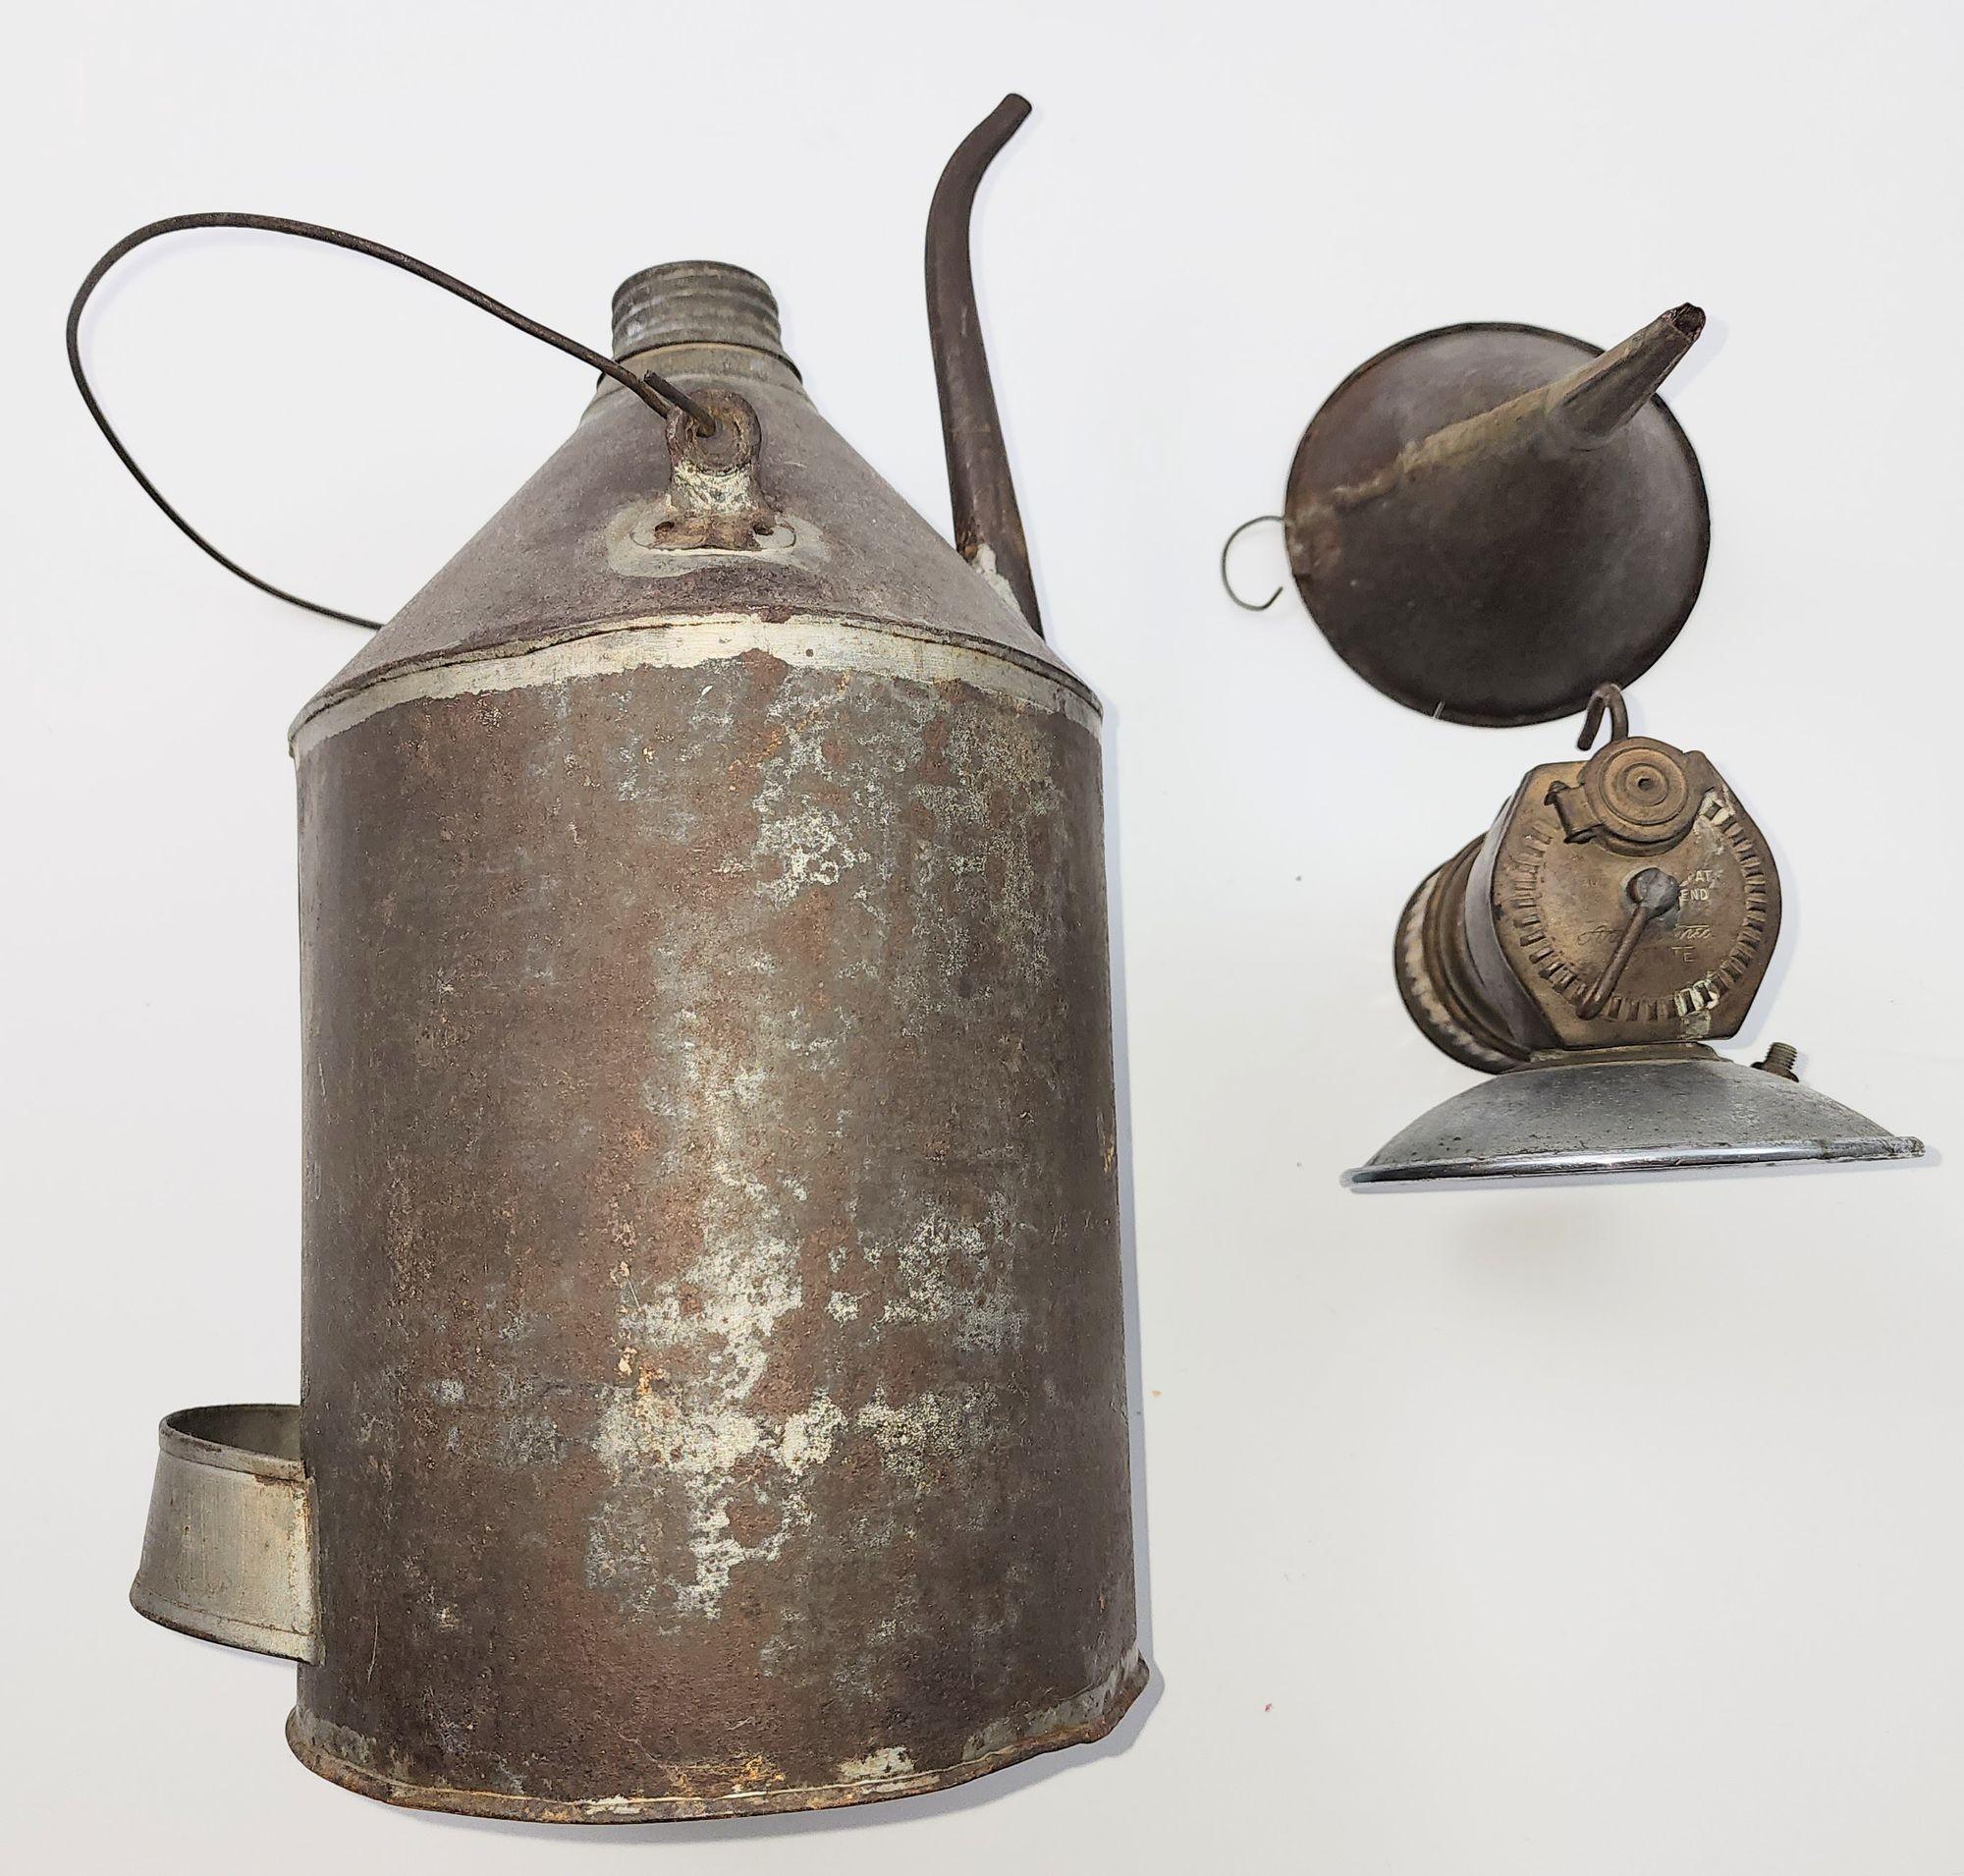 Carbide Coal Miners Lamp with Coal Oil Can and tin funnel by Justrite Areamlined For Sale 1